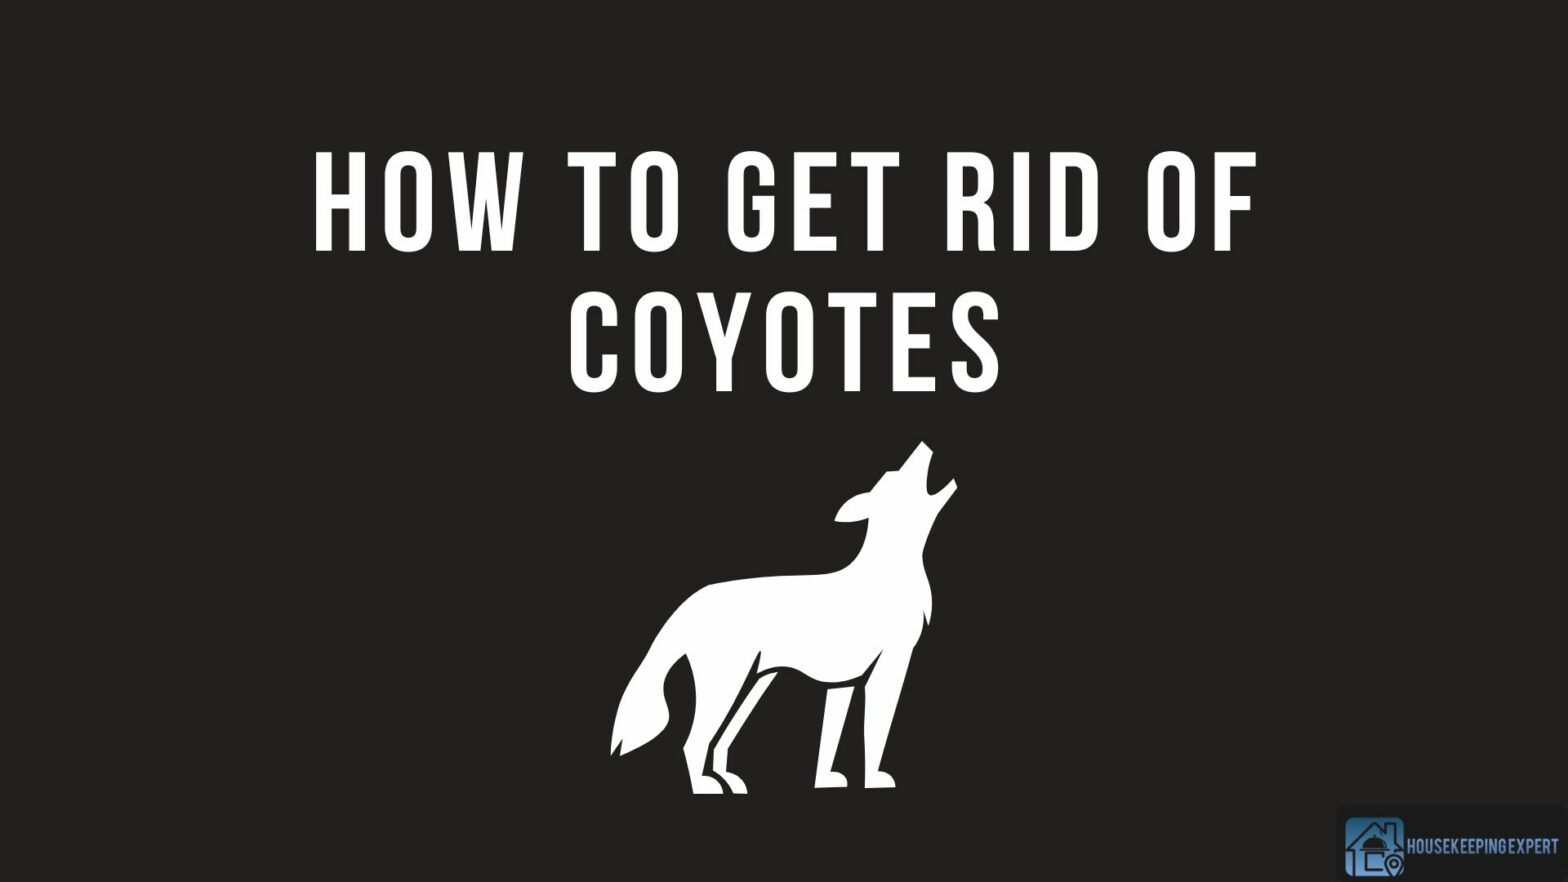 How To Get Rid Of Coyotes